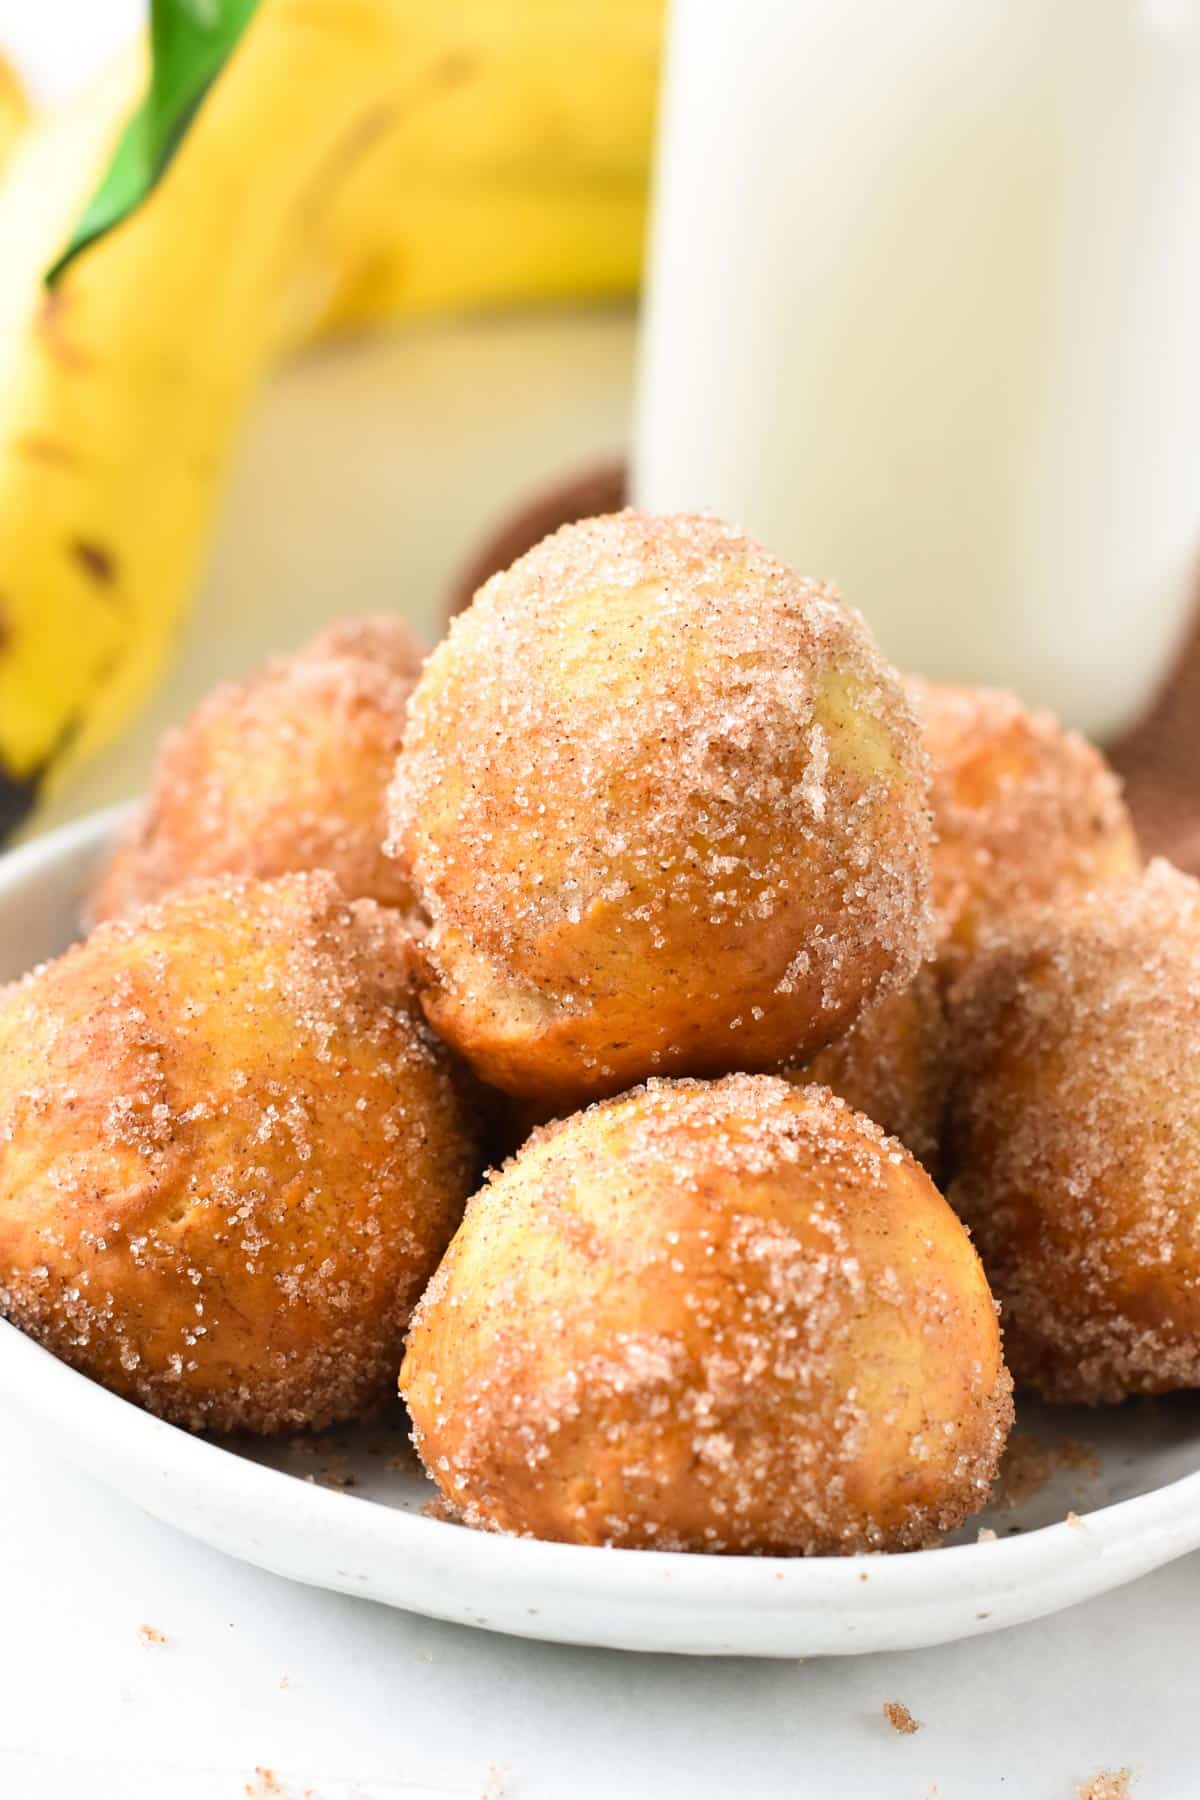 A stack of banana donut holes in a bowl